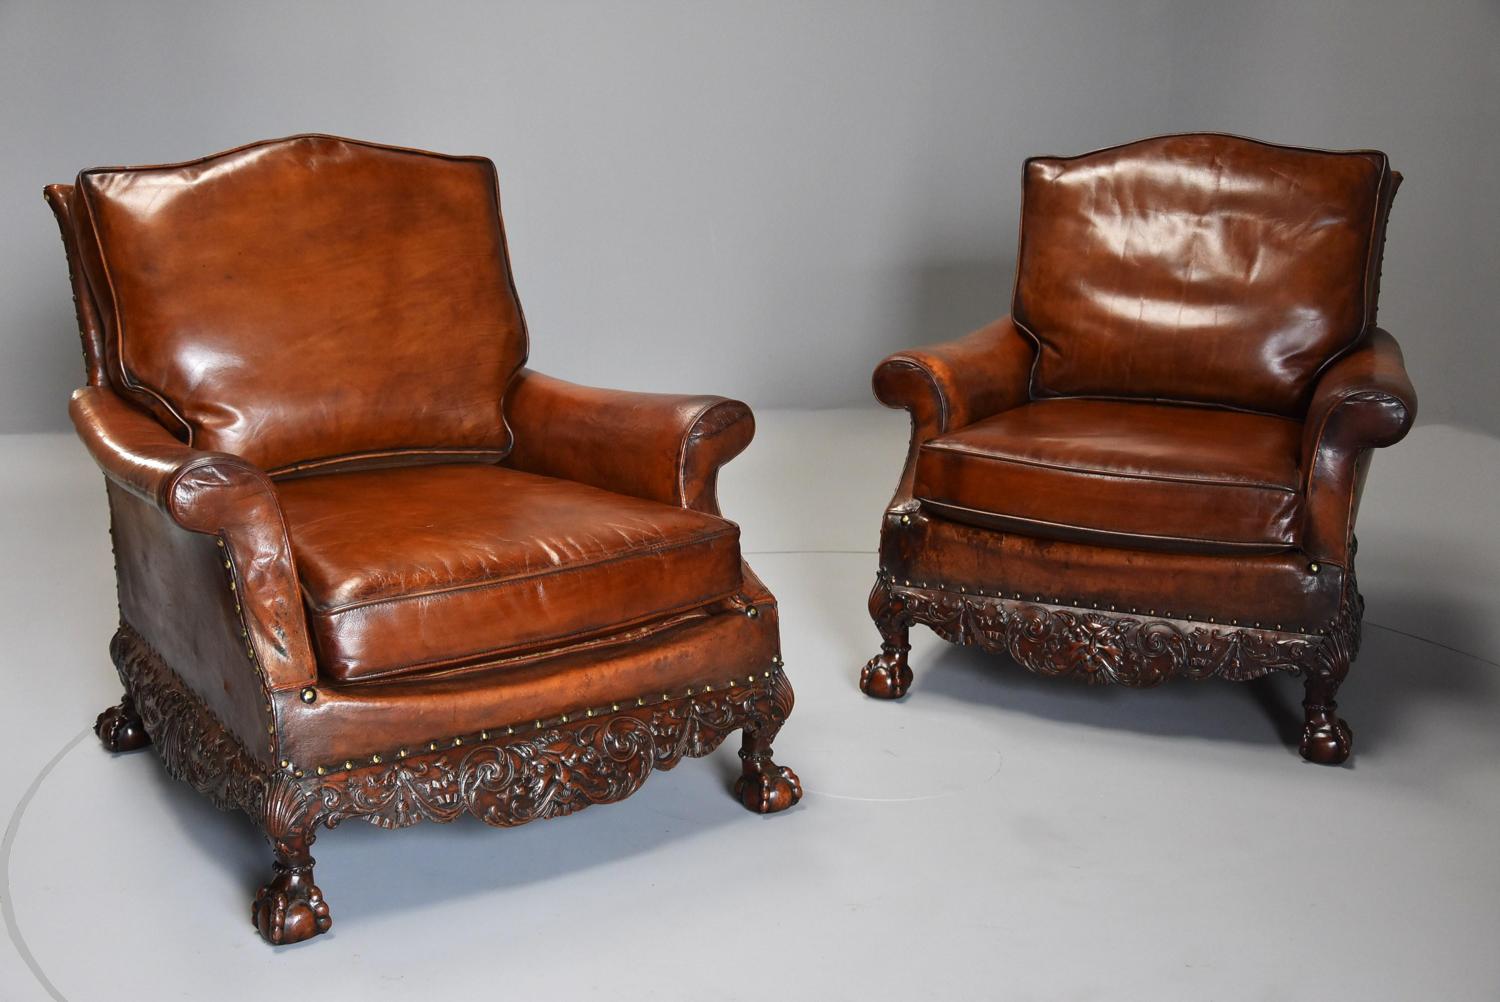 Superb pair of mahogany framed leather armchairs